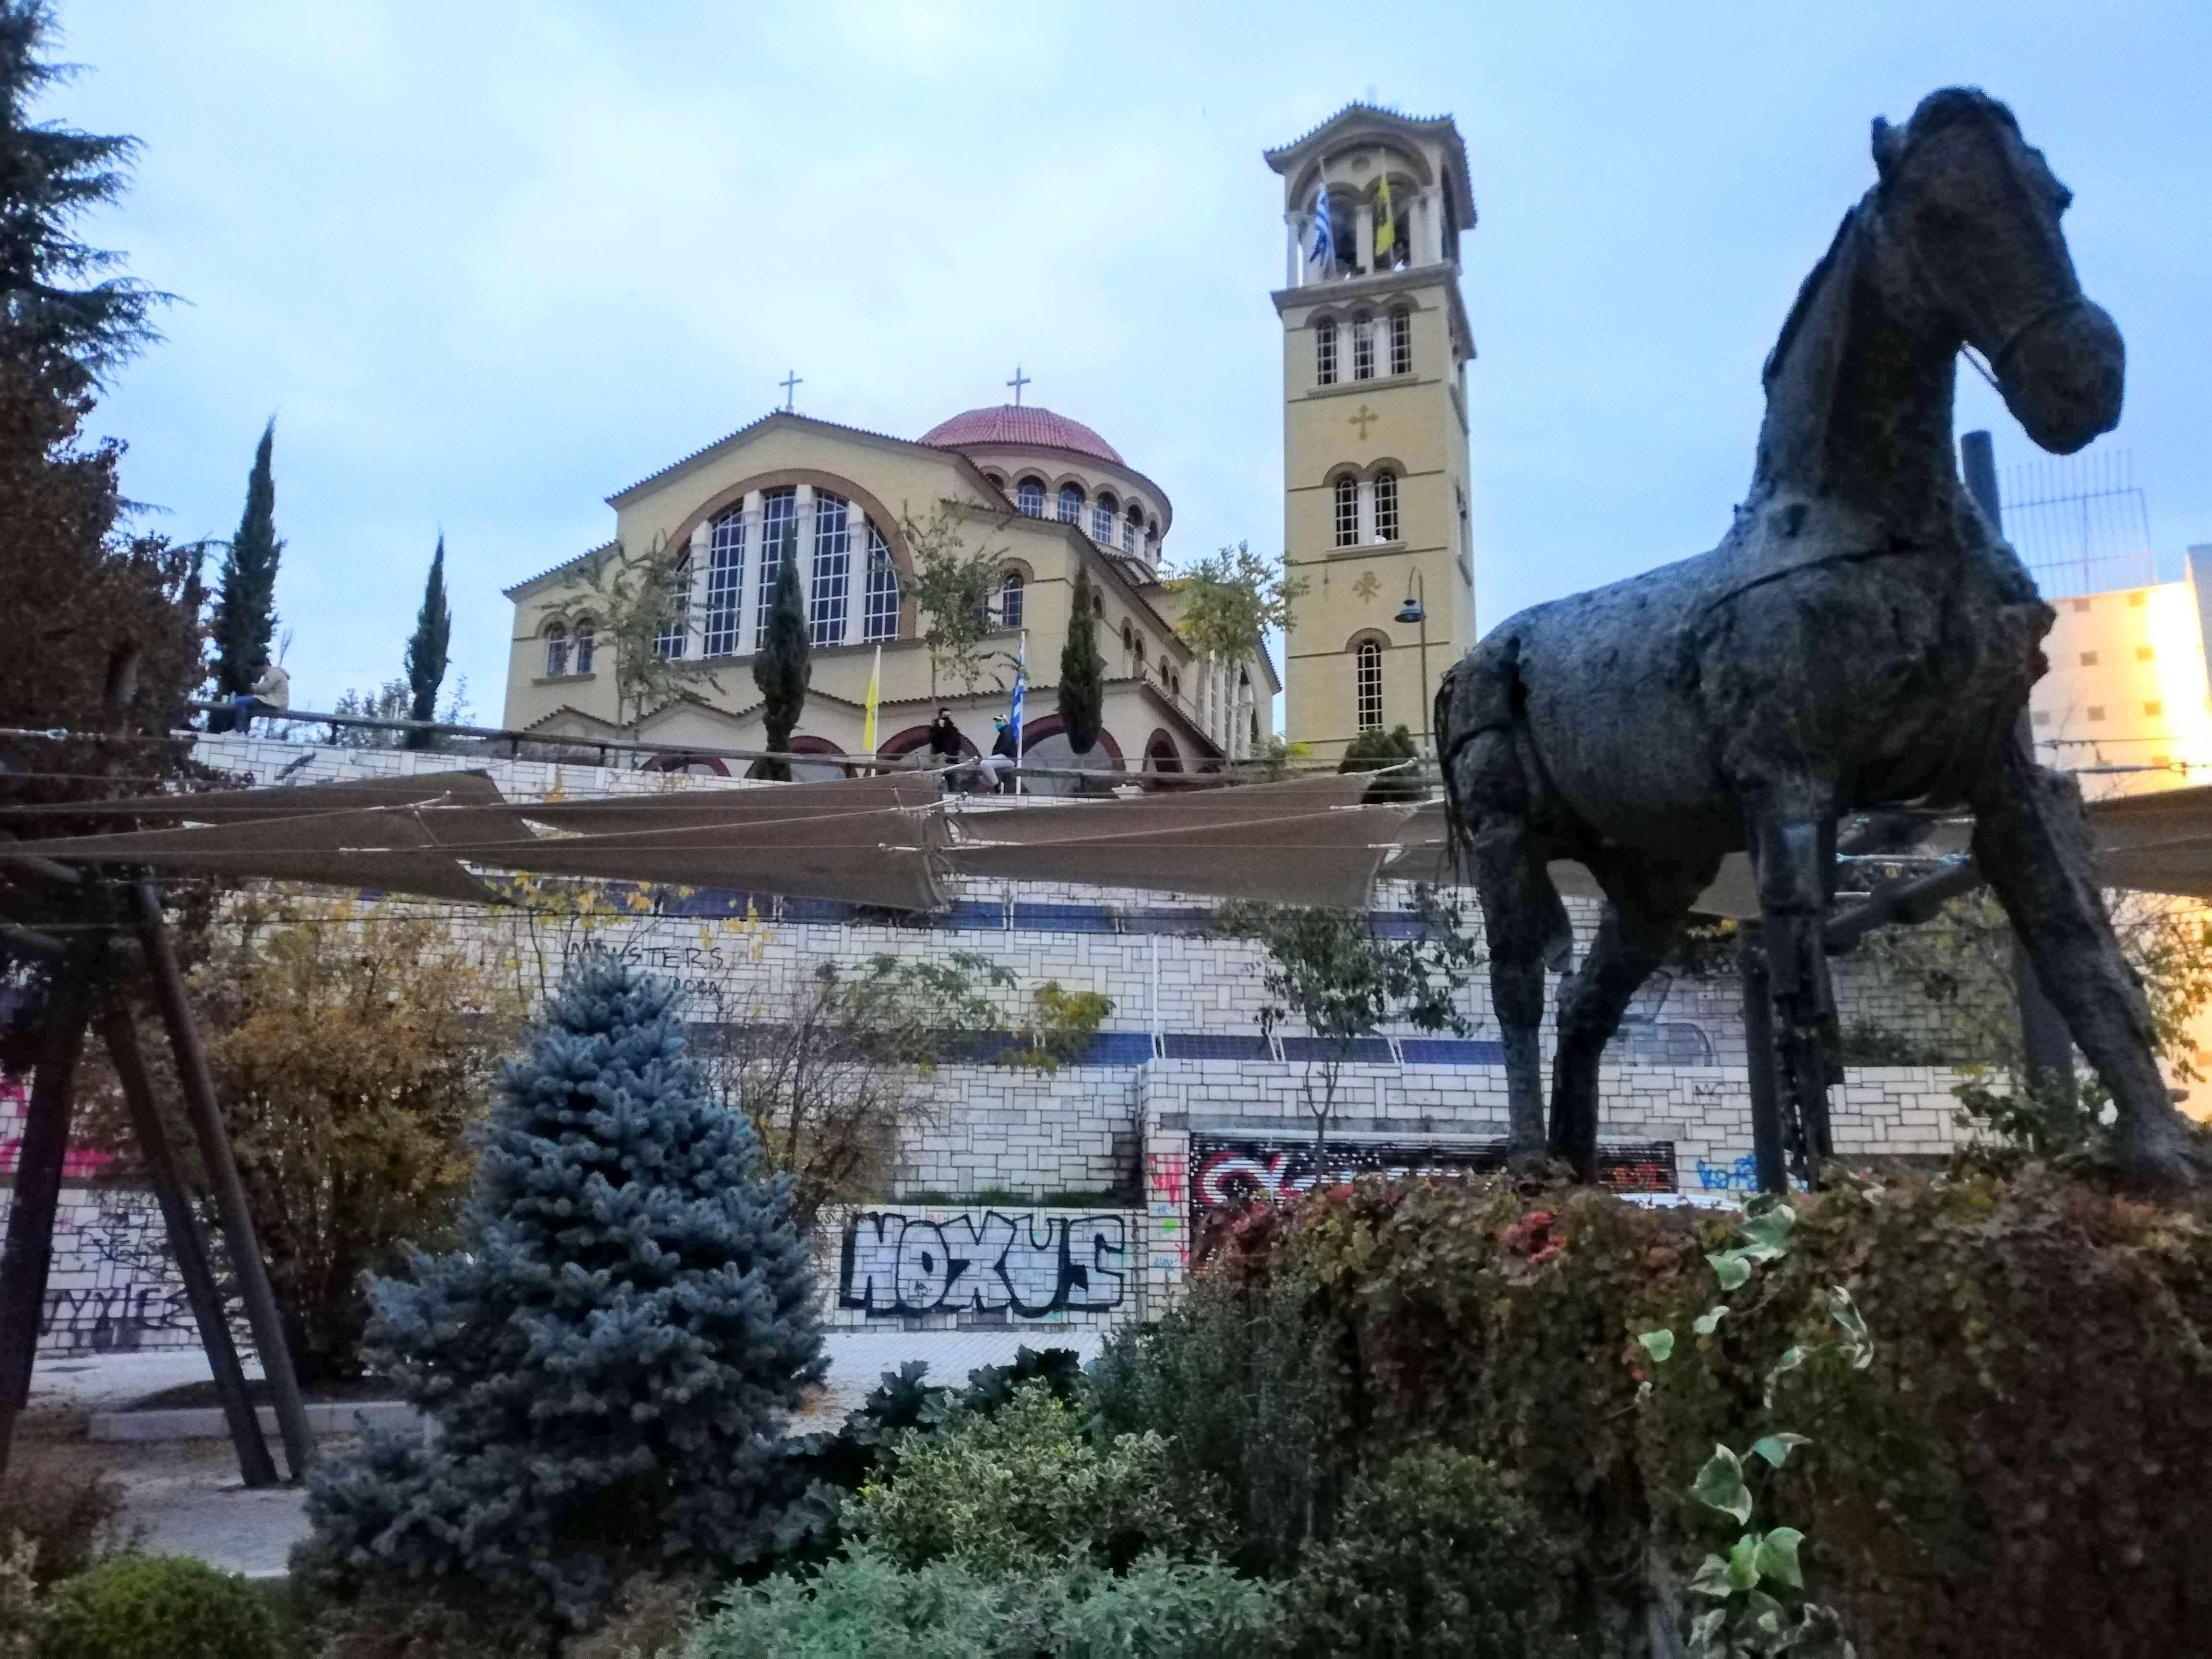 Agios Achillios Cathedral. Statue of a horse, the emblem of the city of Larissa. LARISSA (Town) THESSALIA